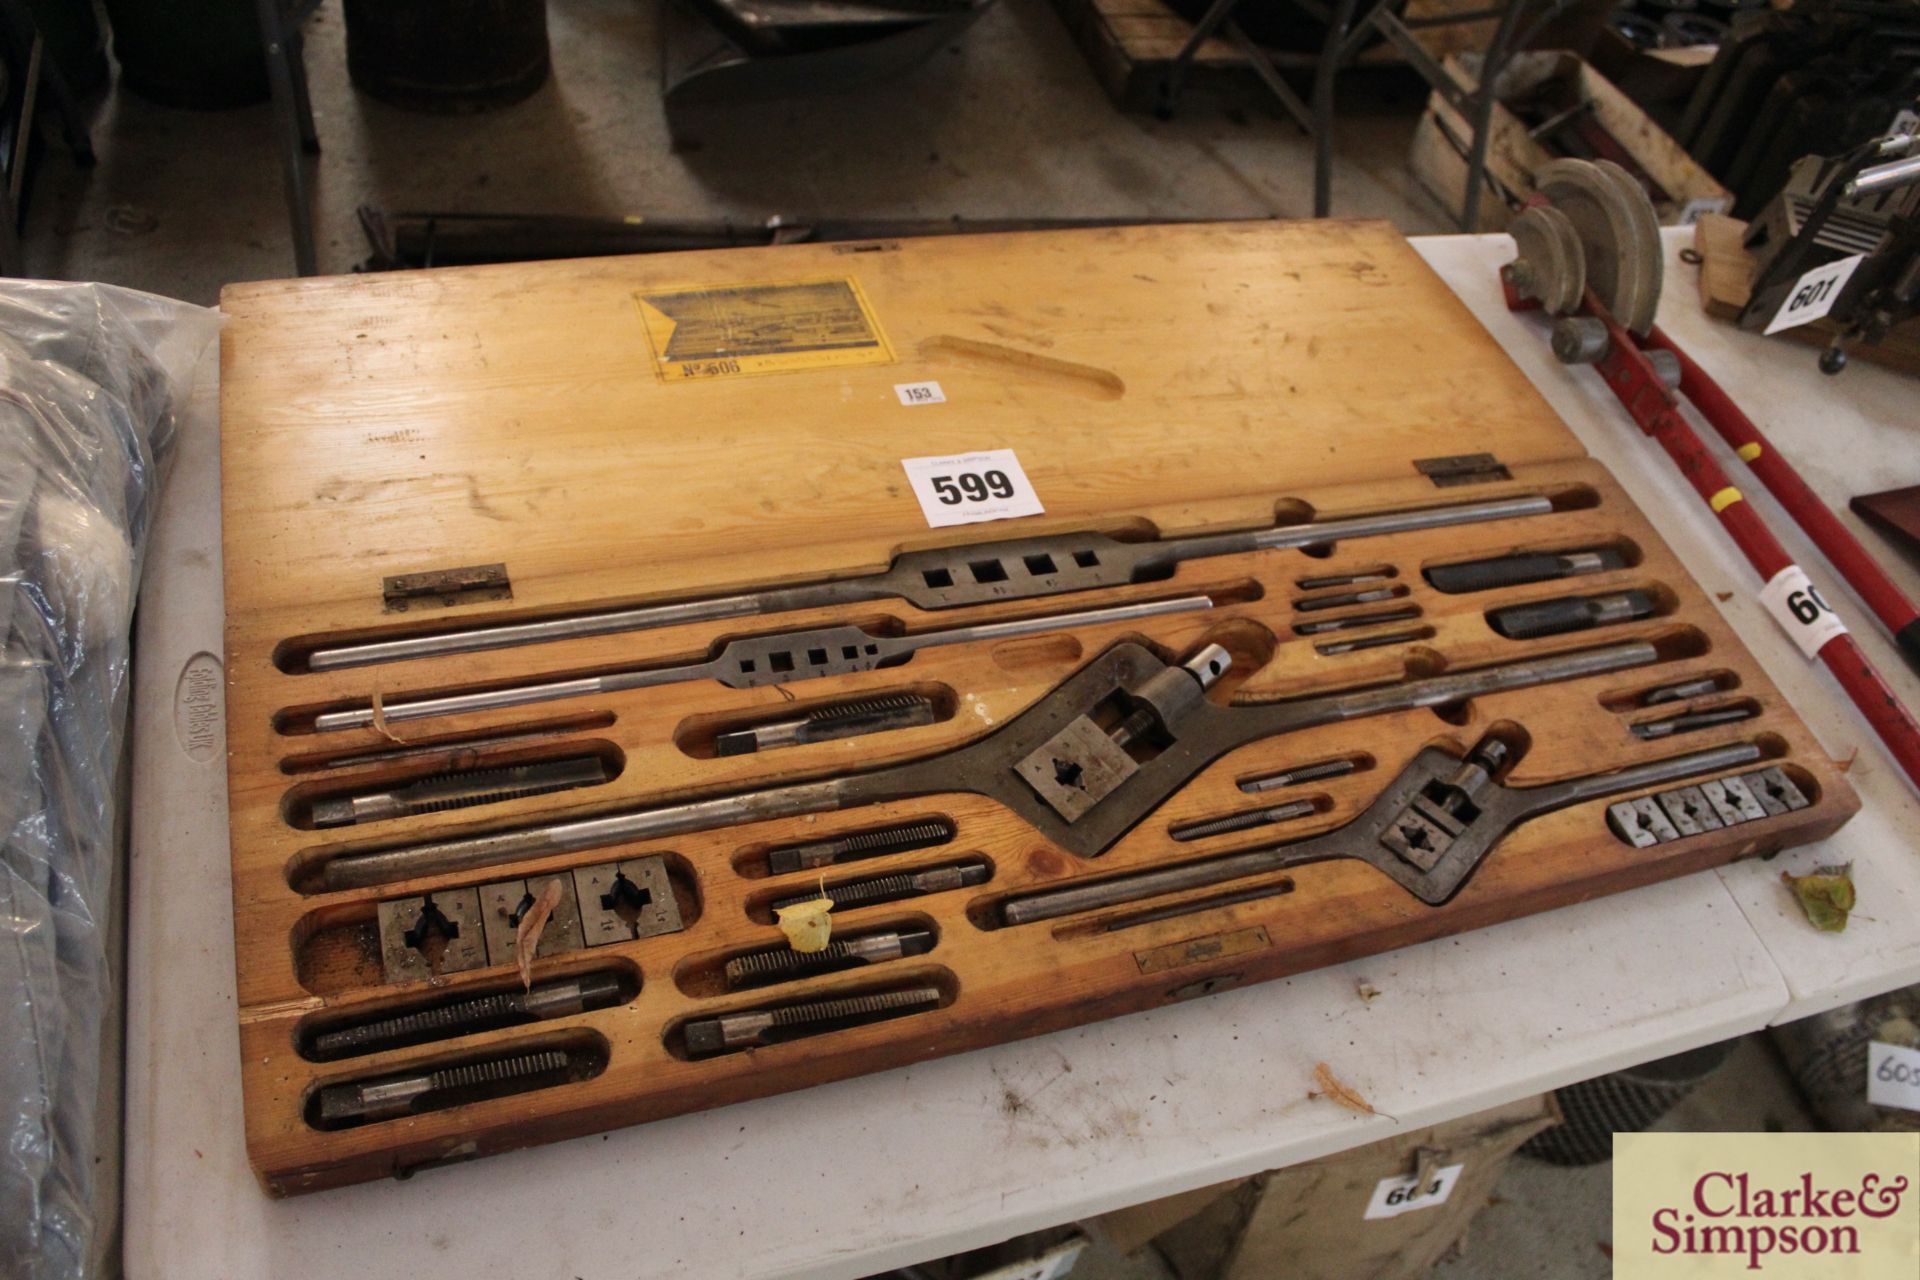 Large imperial tap and die set in wooden case.